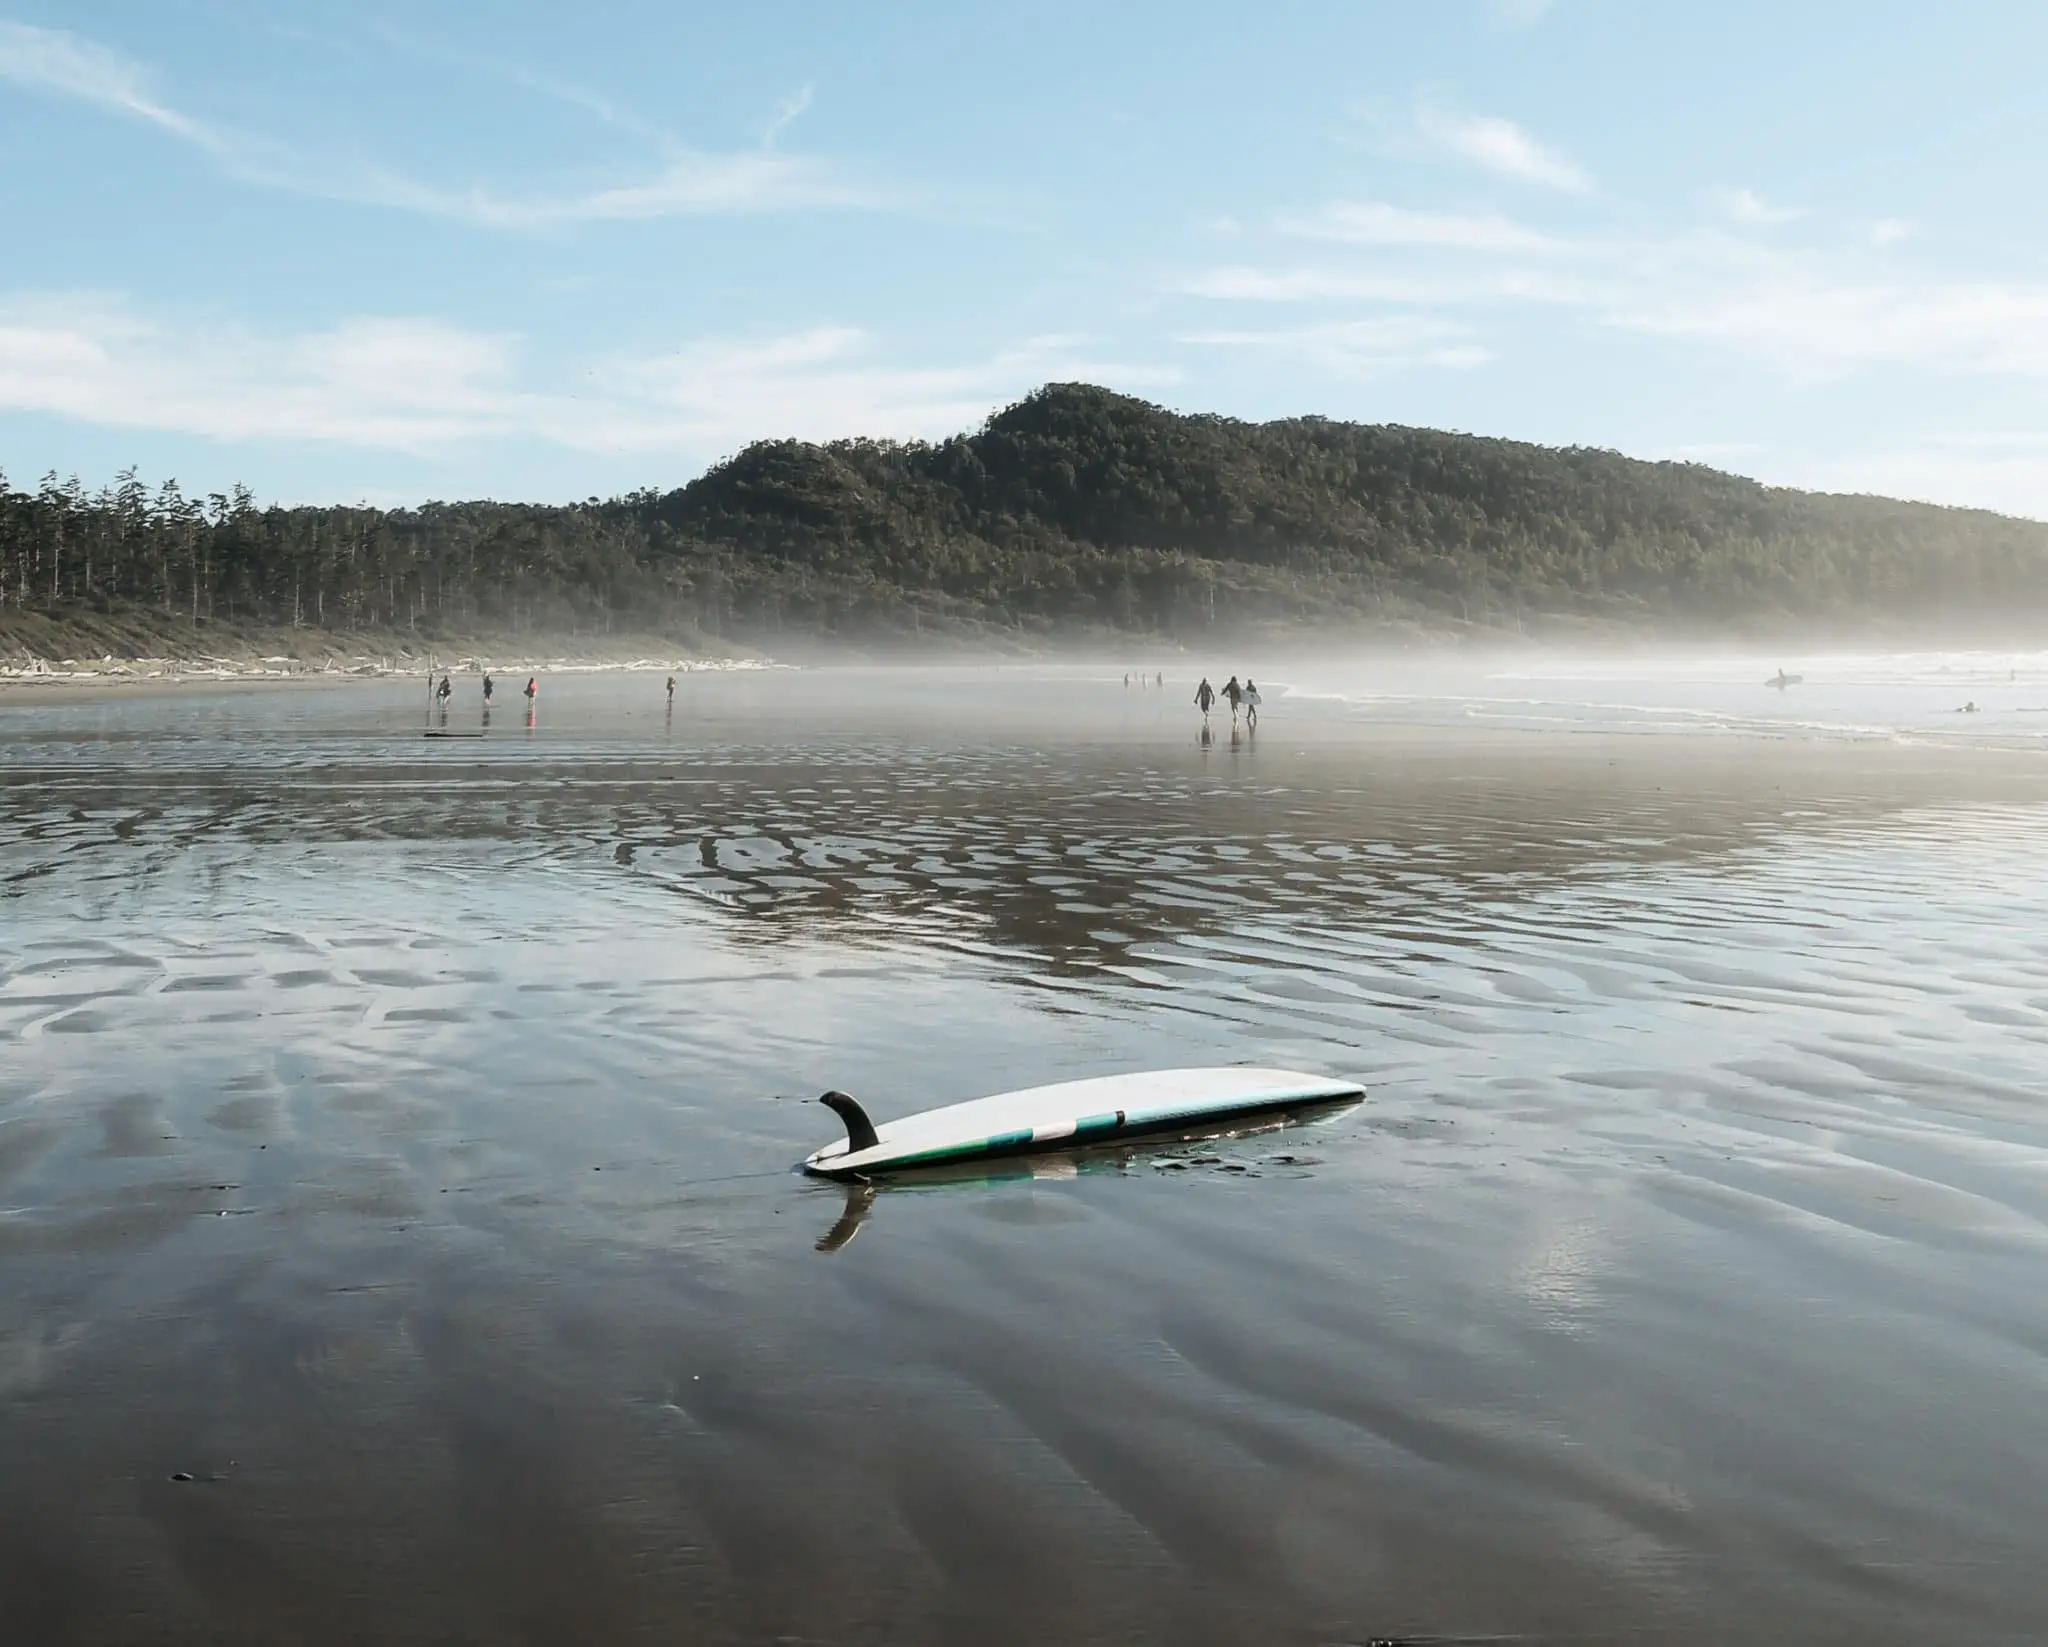 A surfboard laying on a beach in Tofino